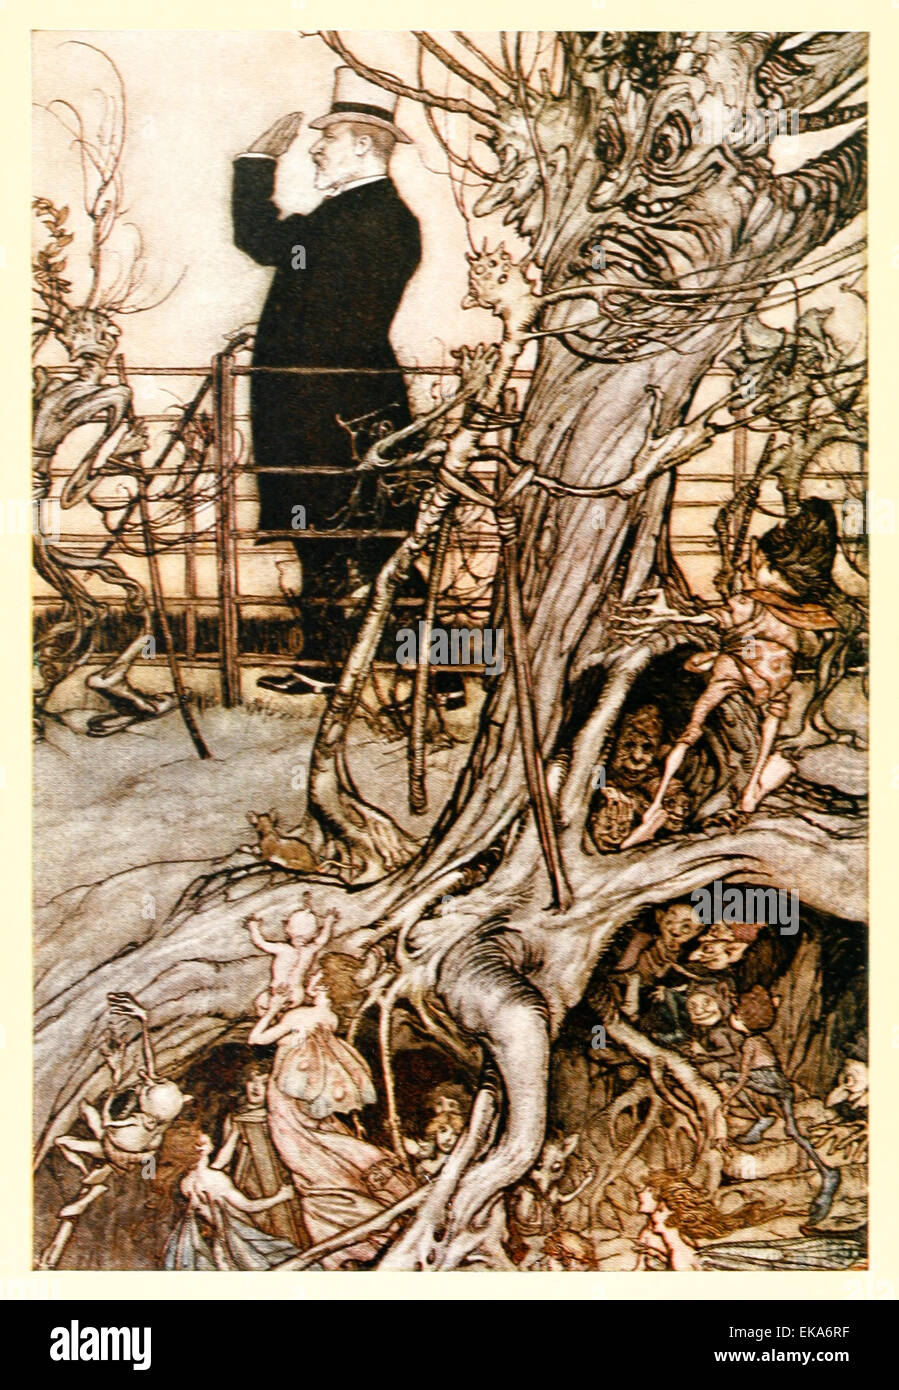 The Kensington Gardens are in London where the King lives - Illustration by Arthur Rackham (1867-1939) from ‘Peter Pan in Kensington Gardens' by J.M. Barrie (1860-1937). See description Stock Photo